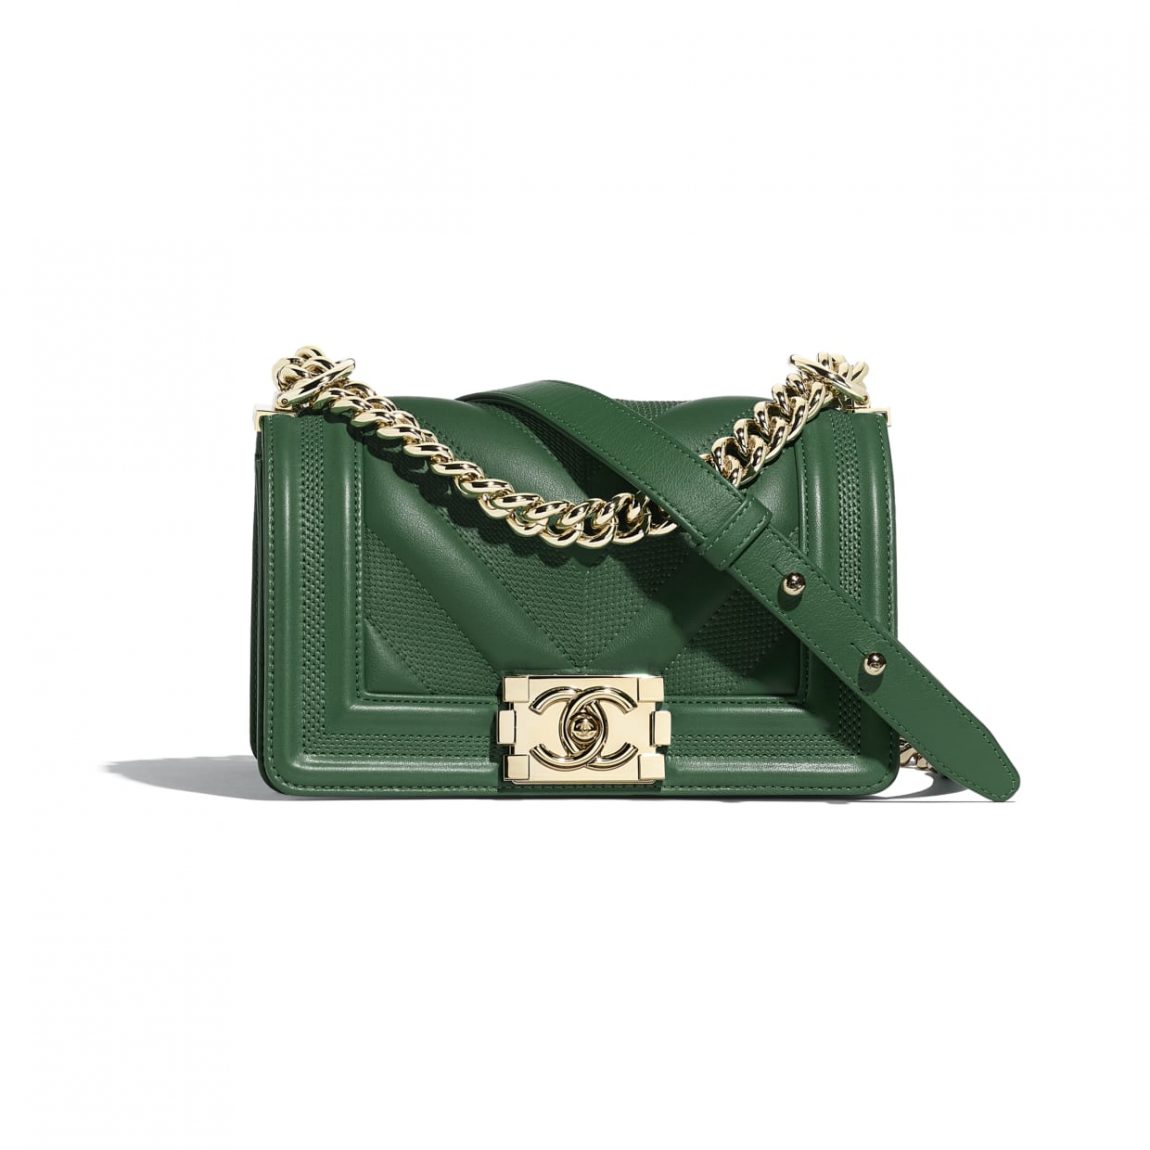 UK Chanel Bag Price List Reference Guide | Spotted Fashion